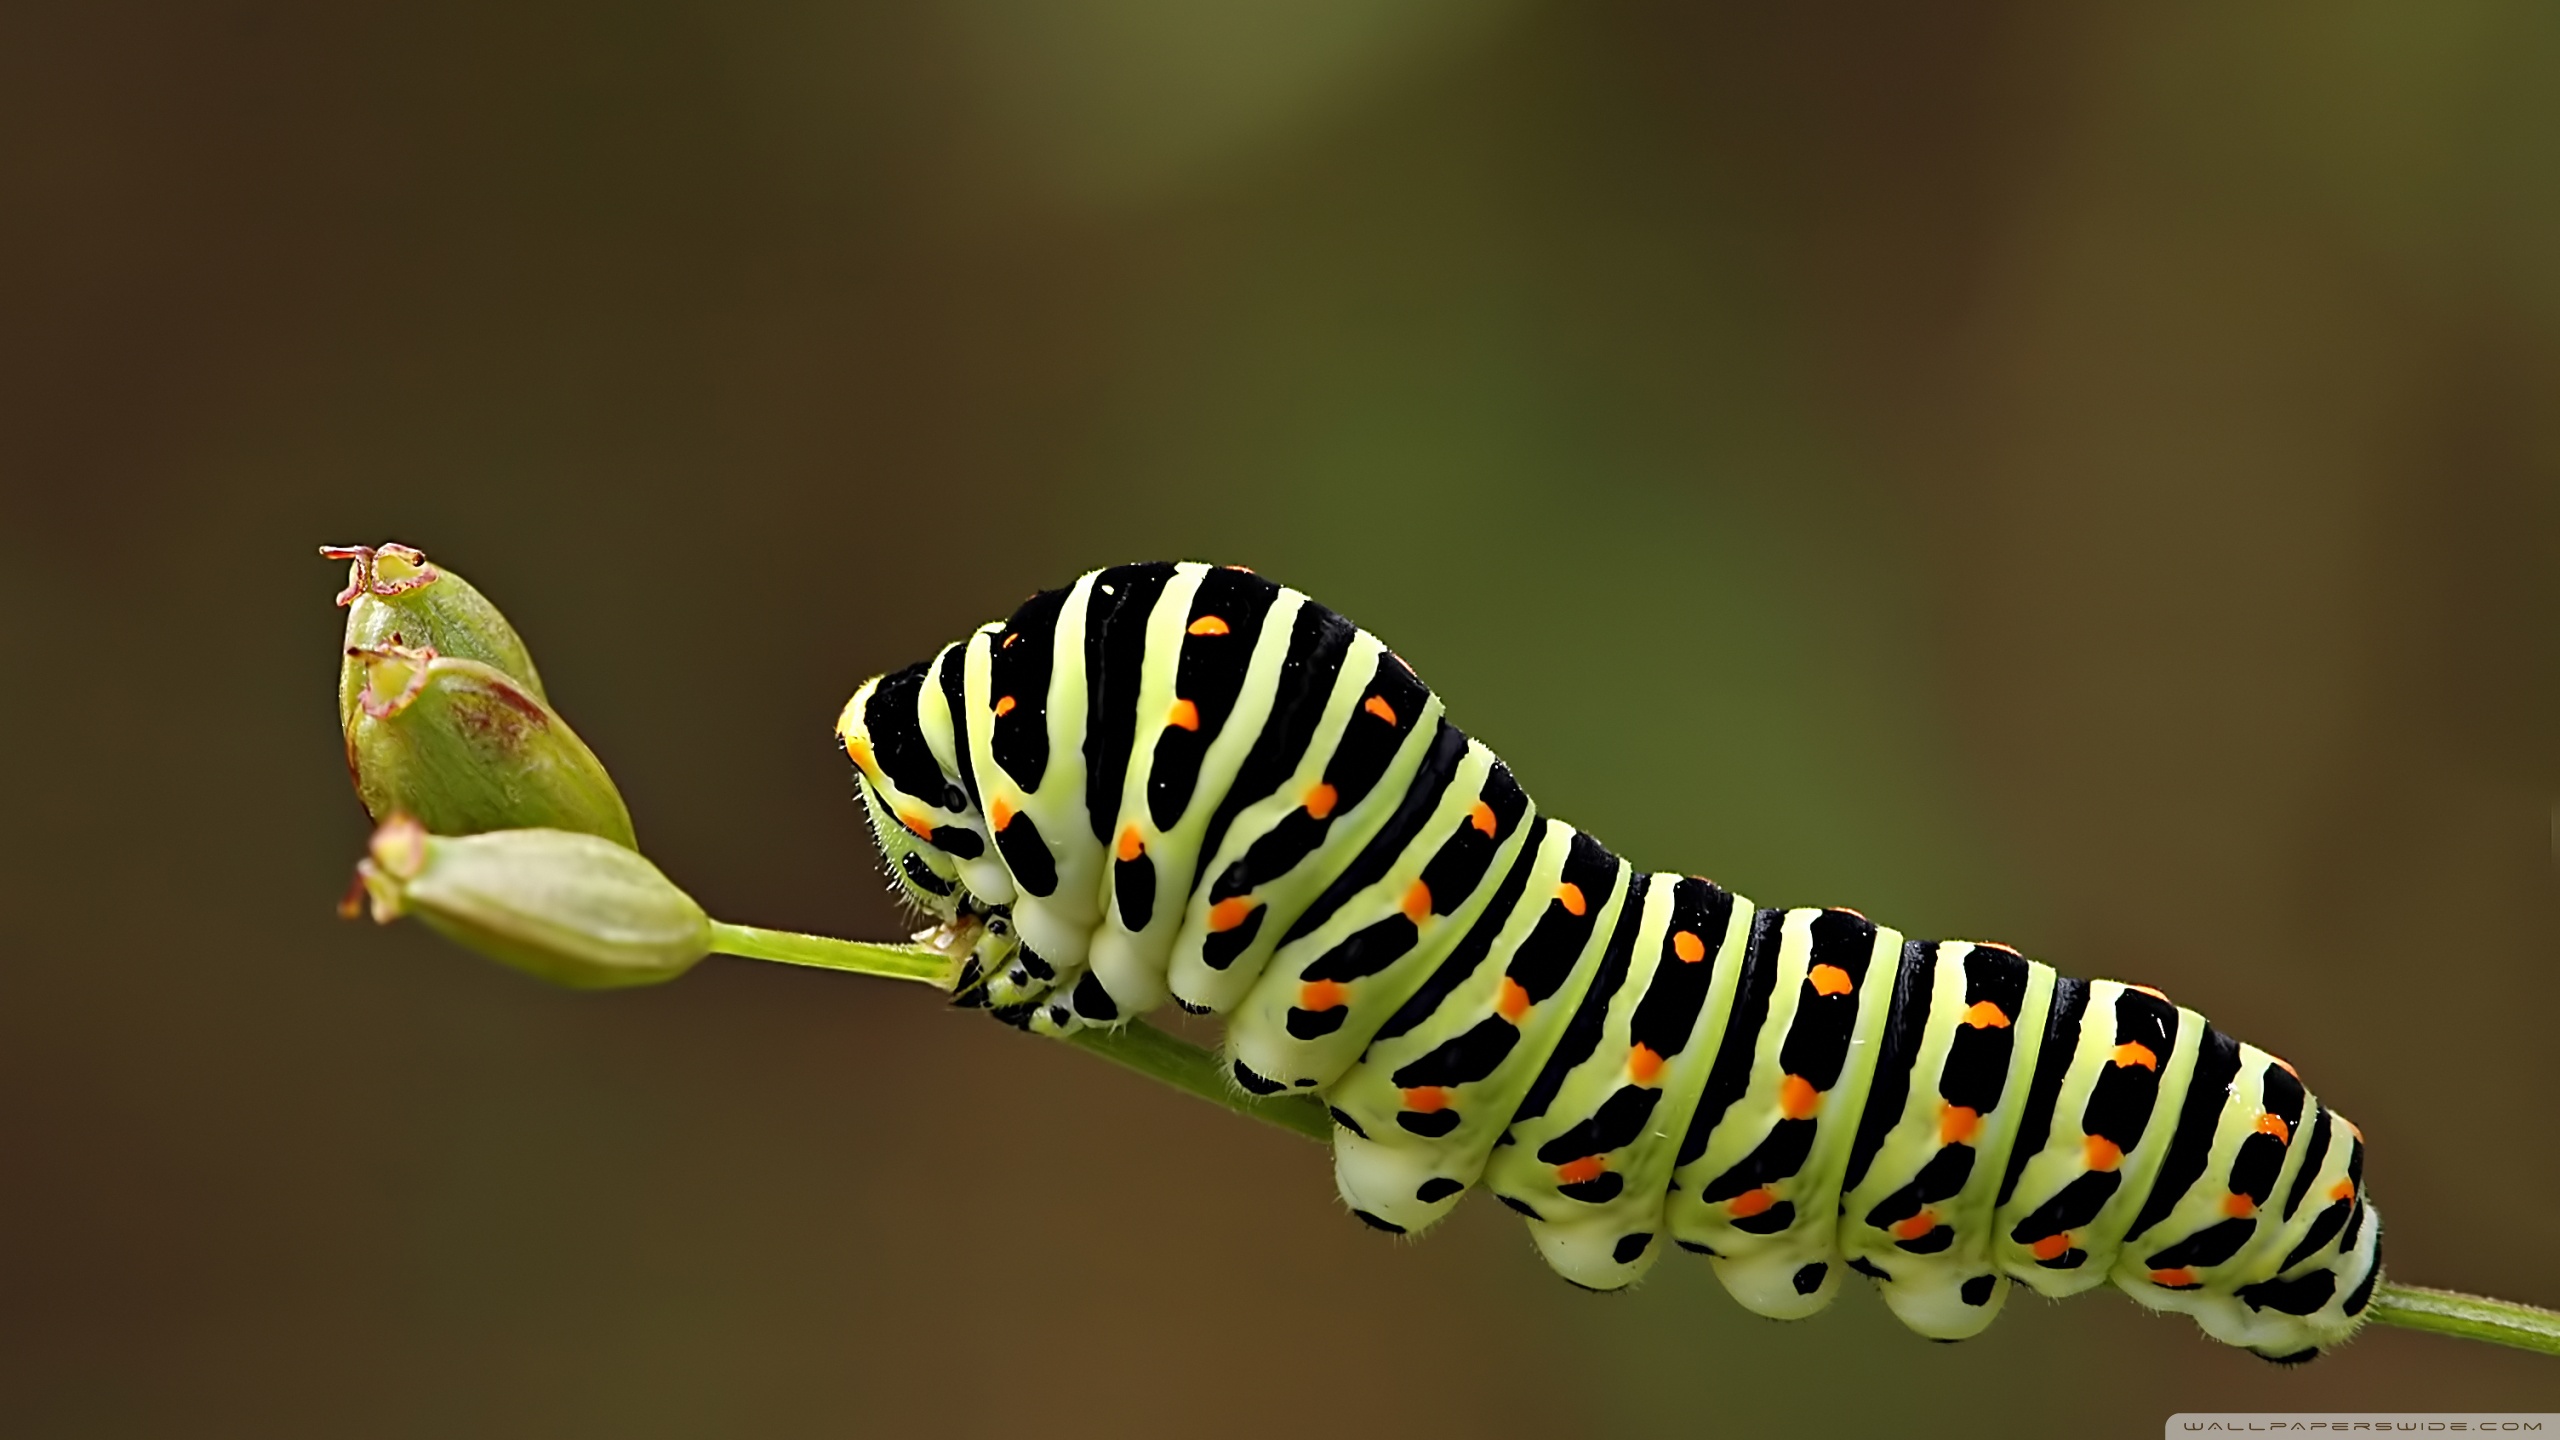  Caterpillar  Wallpapers  Pictures Images